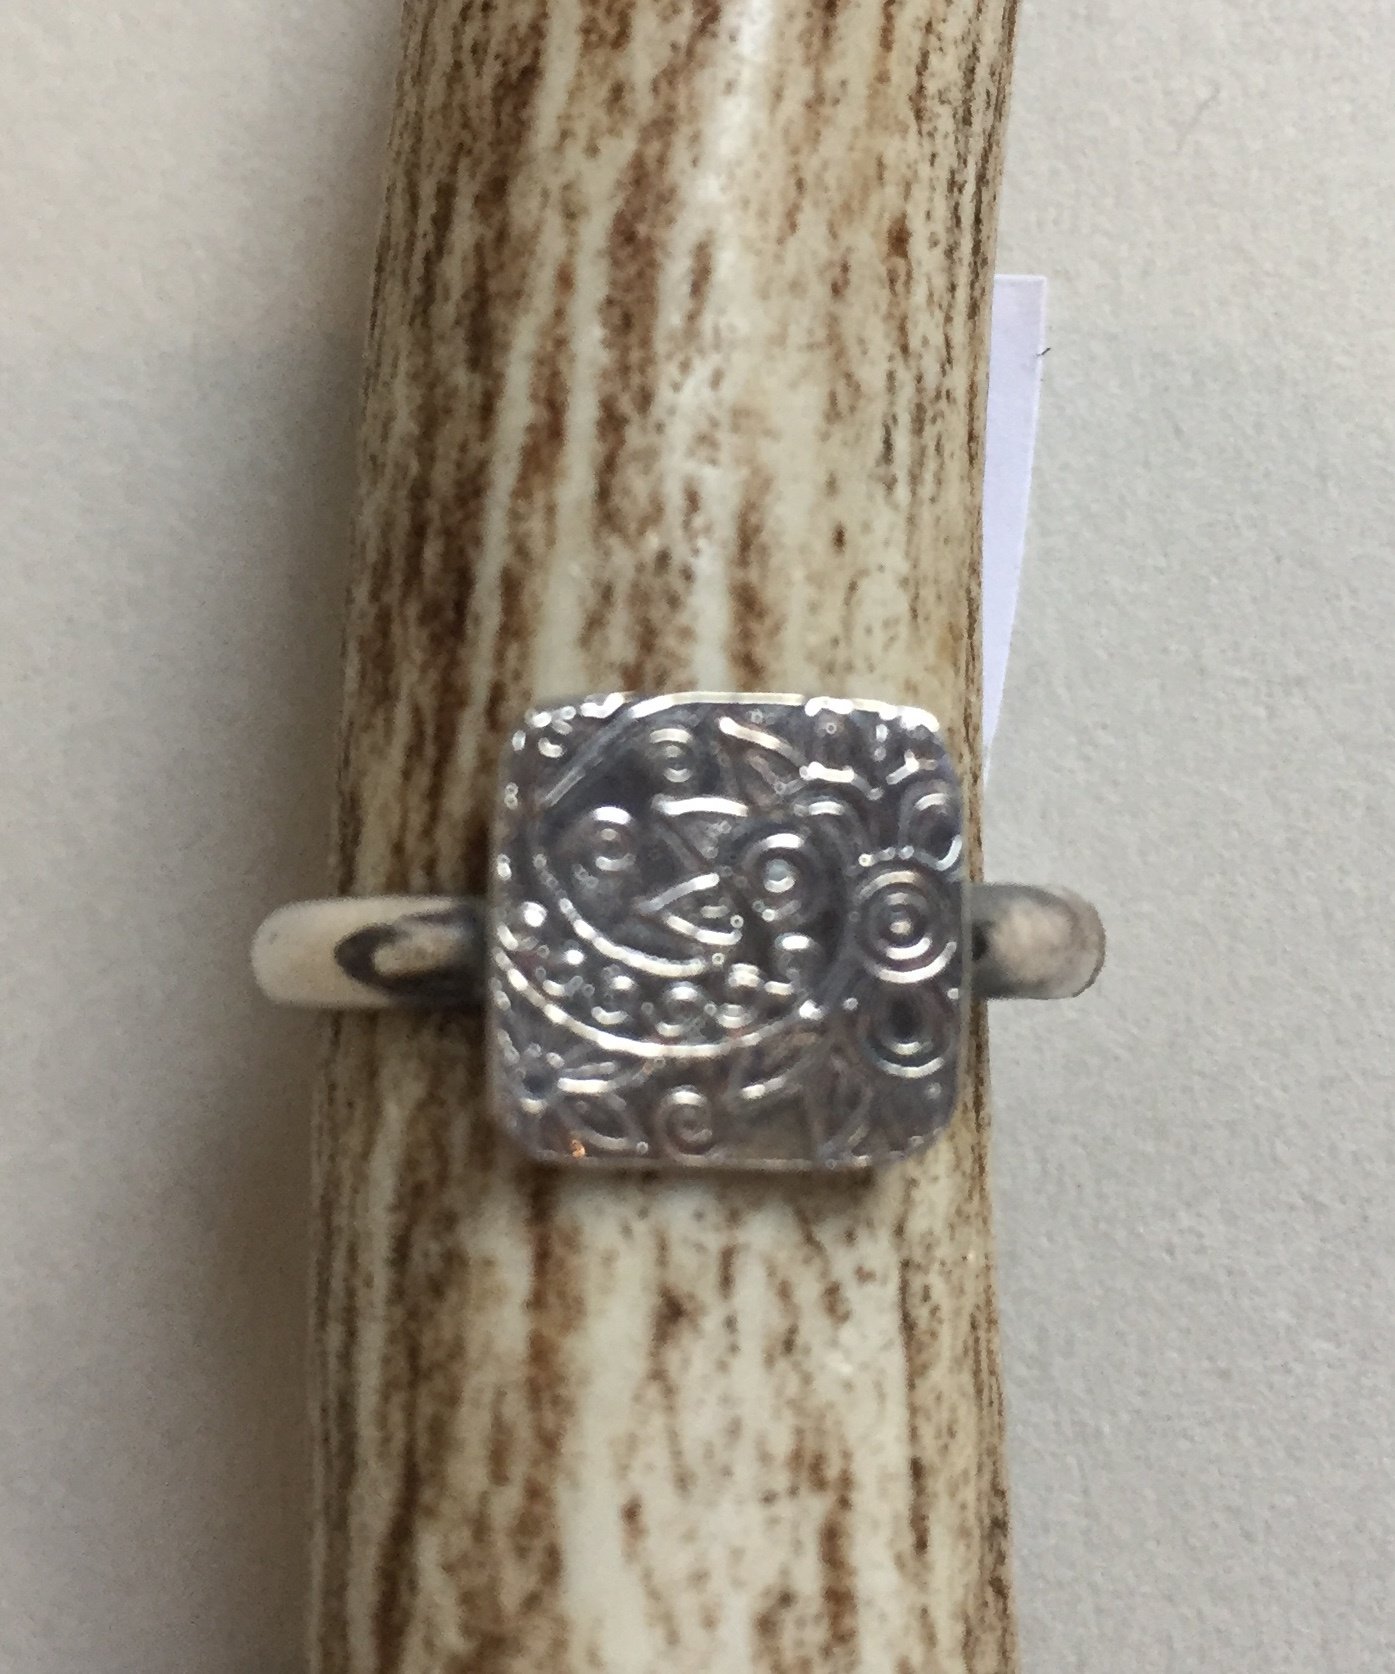 Square PMC Ring EM 118
Sterling Silver
$30.
